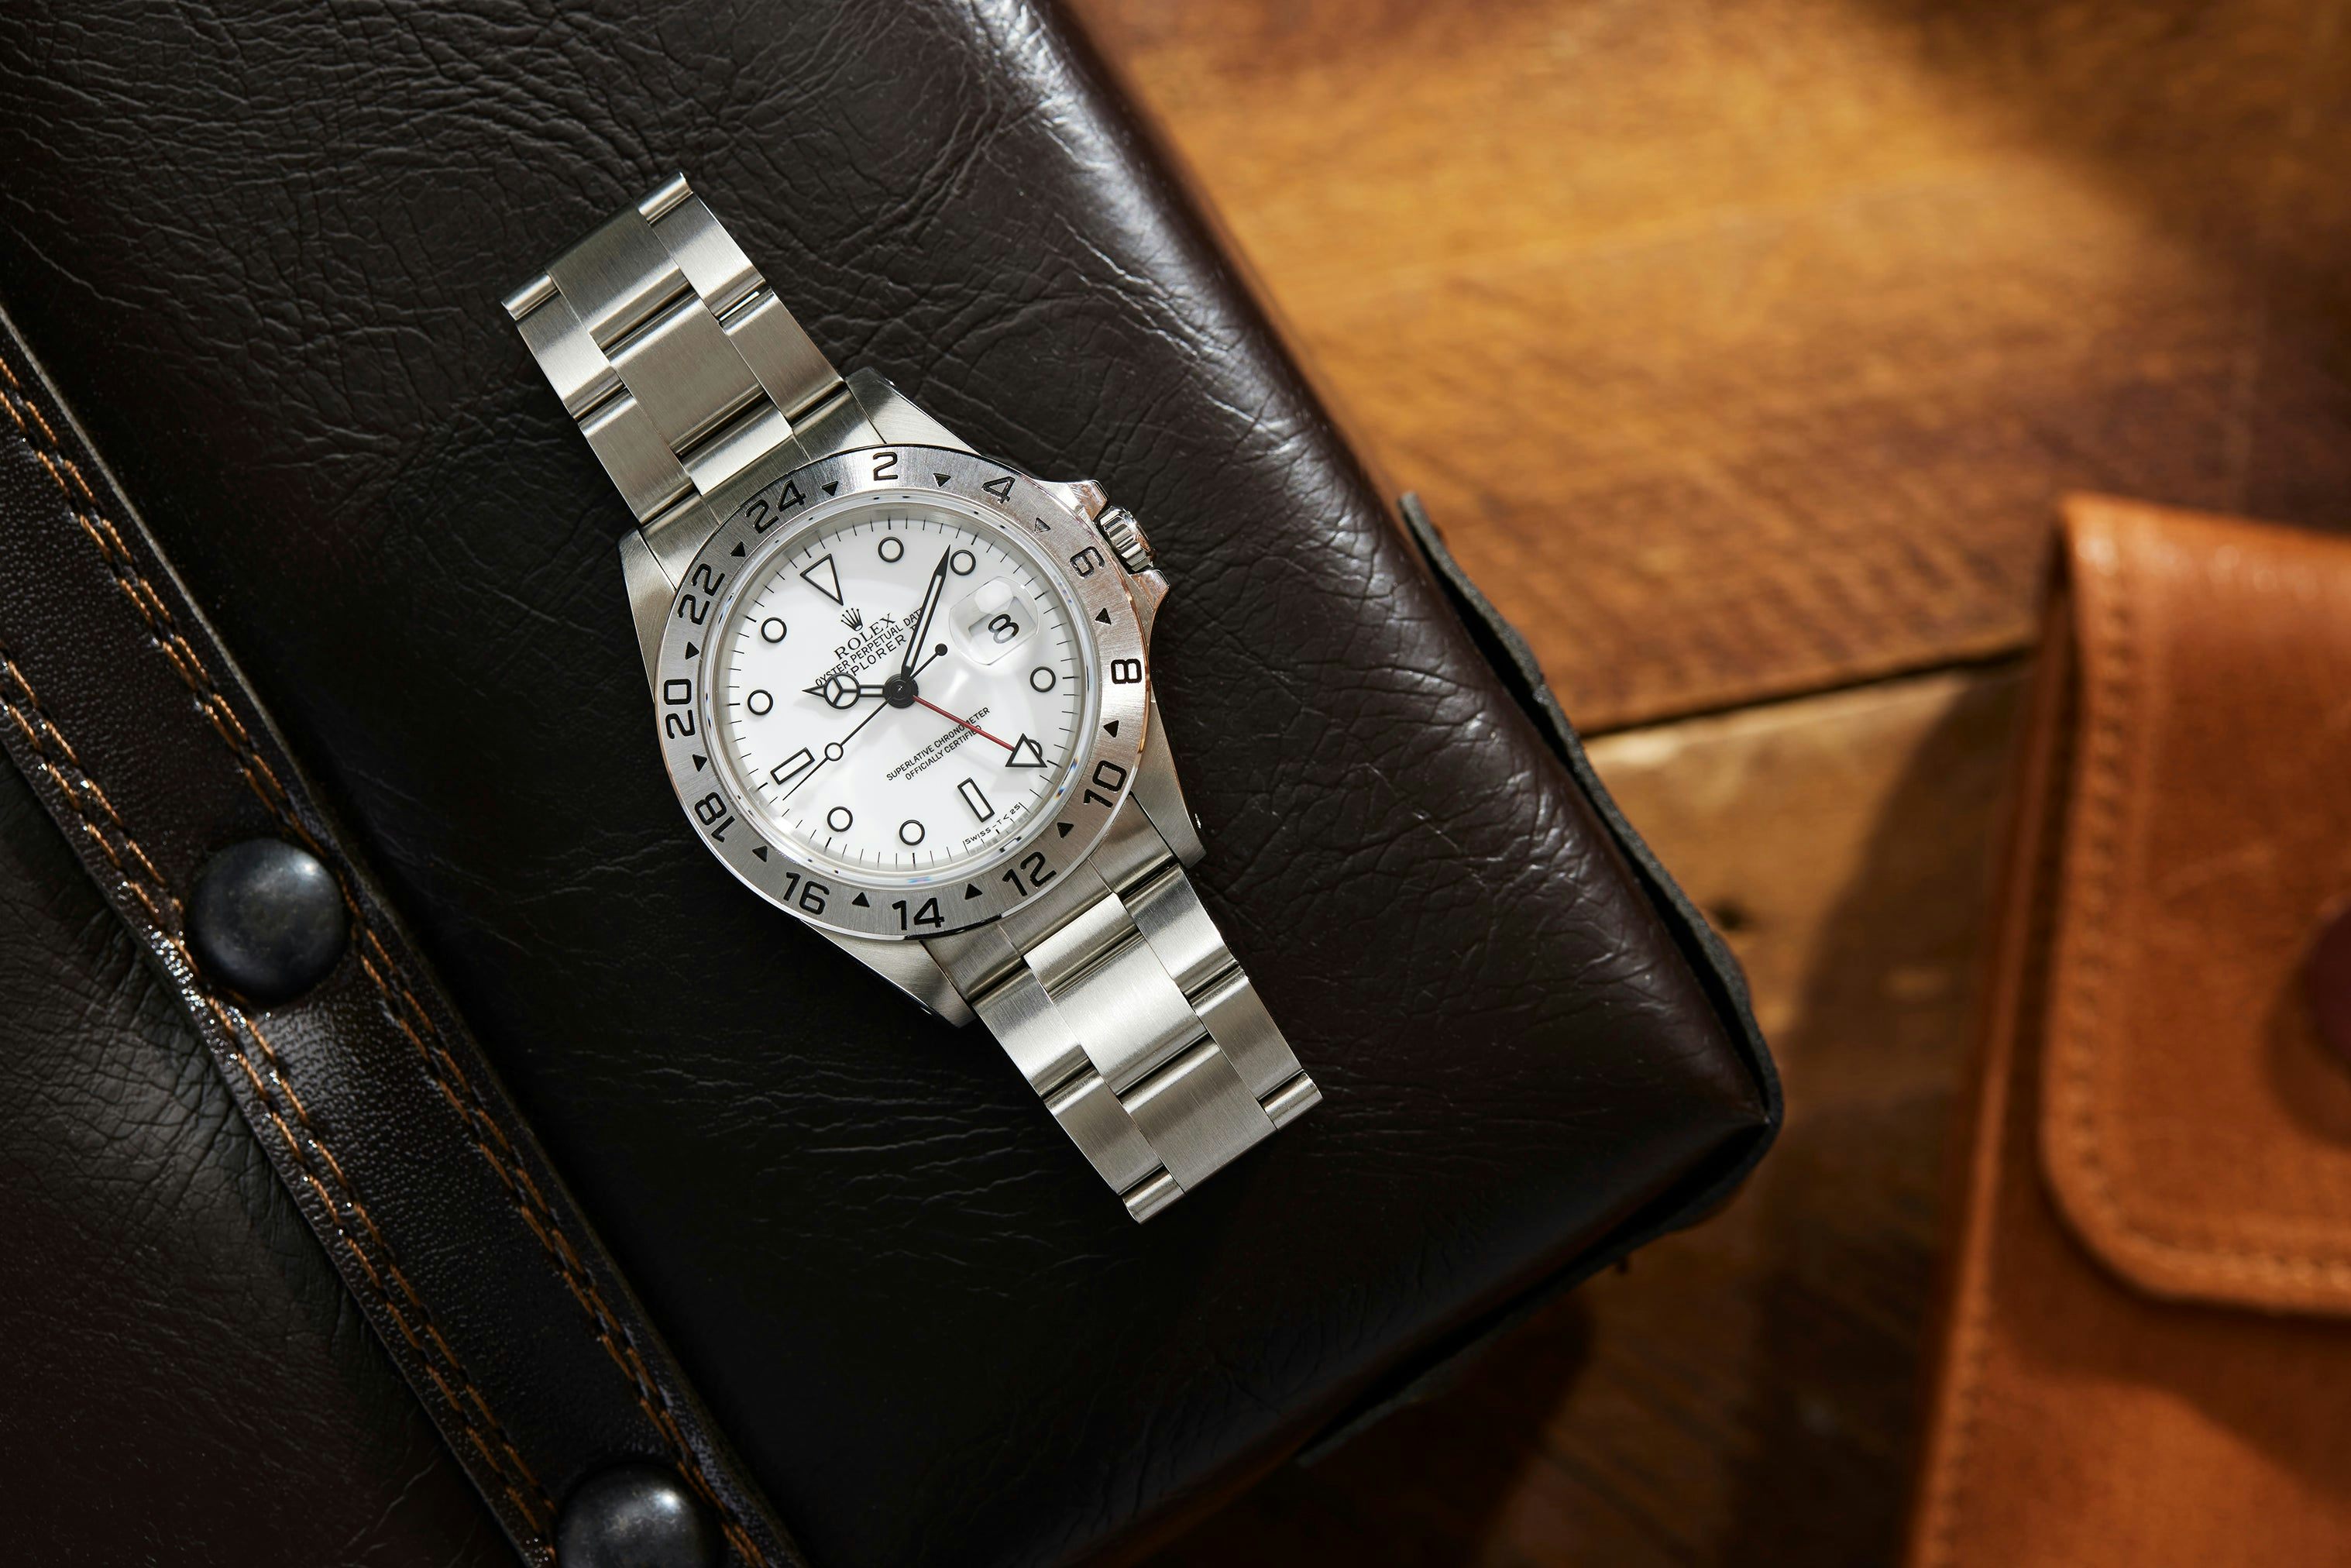 Top 3 Best Travel Cases for Rolex and Other Luxury Watches